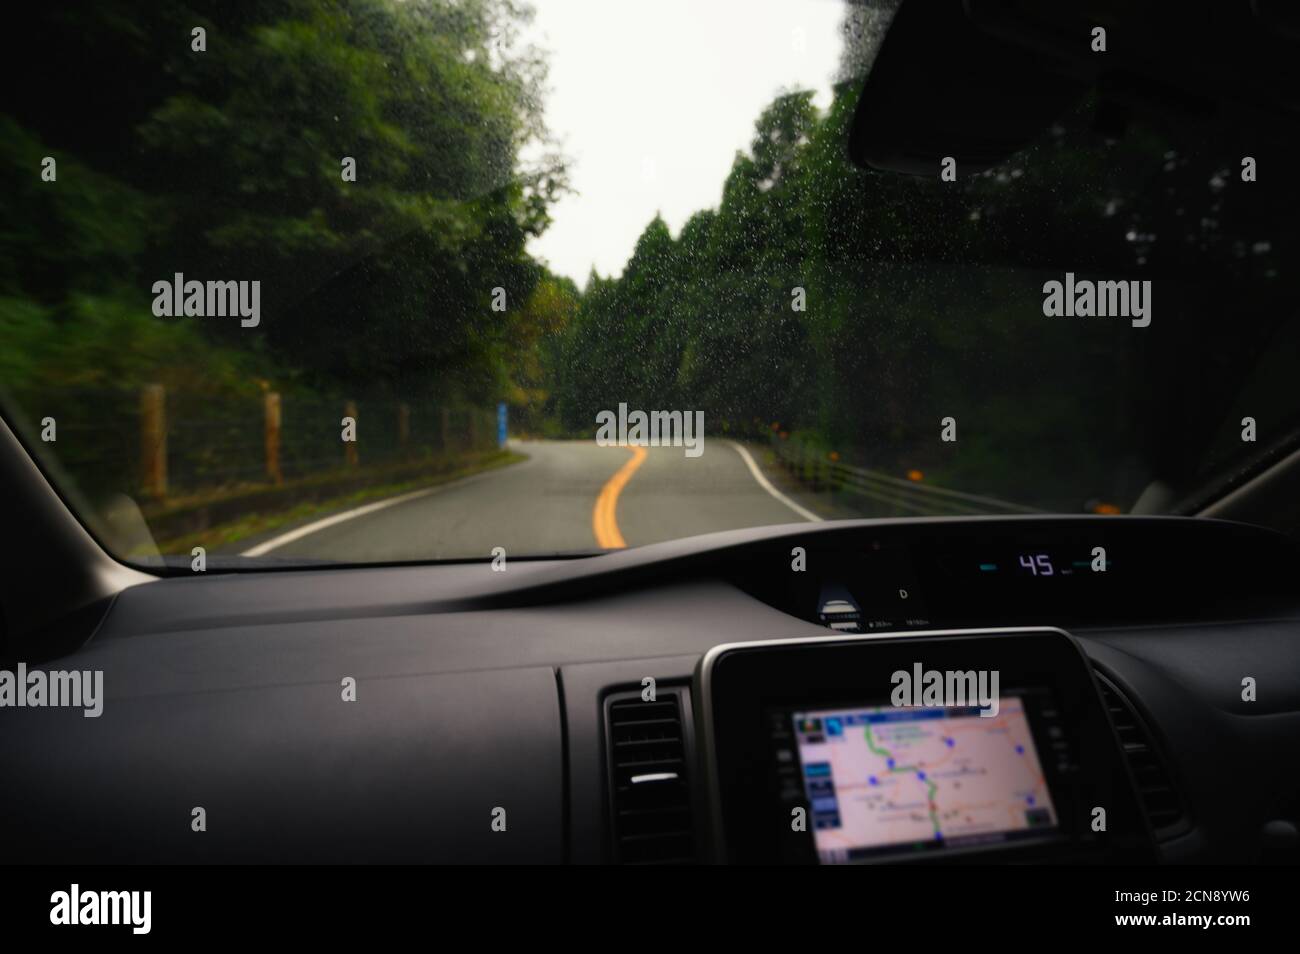 Road view in rainy season from a car windscreen that runs with care,   natural scenery surrounded with navigation device in the car at Japan. Stock Photo